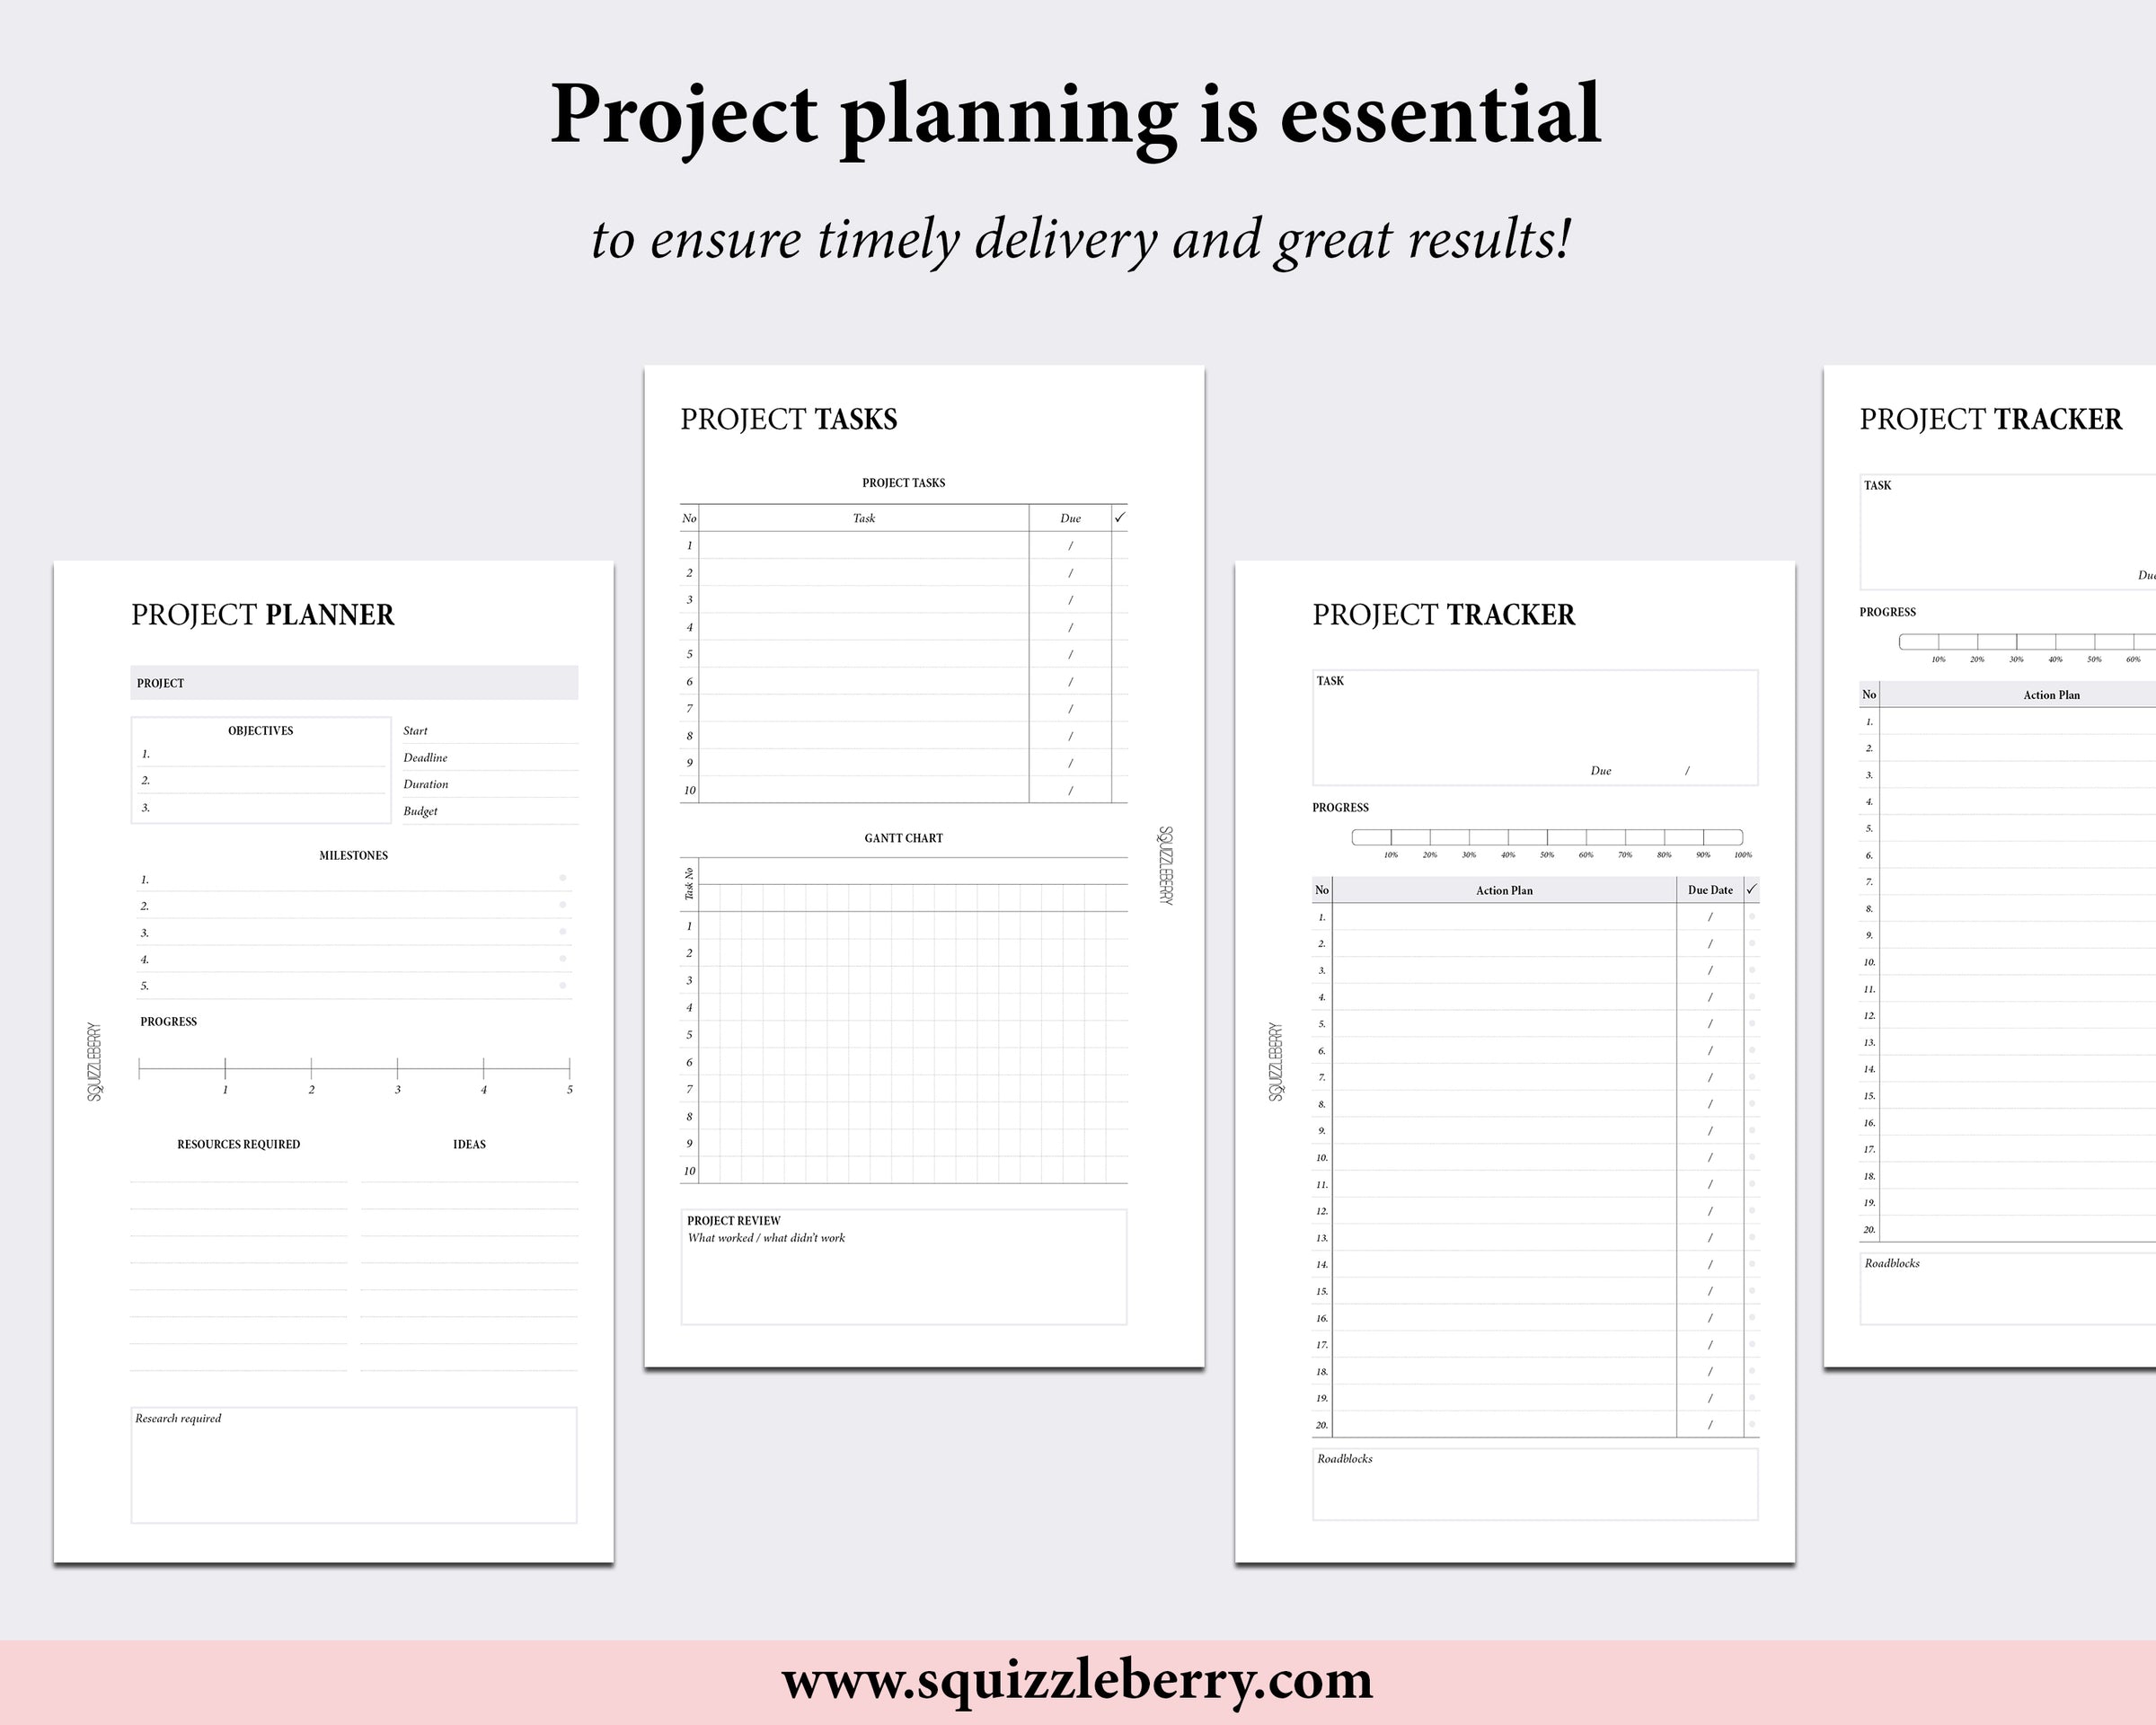 Project Planner - Personal | SquizzleBerry